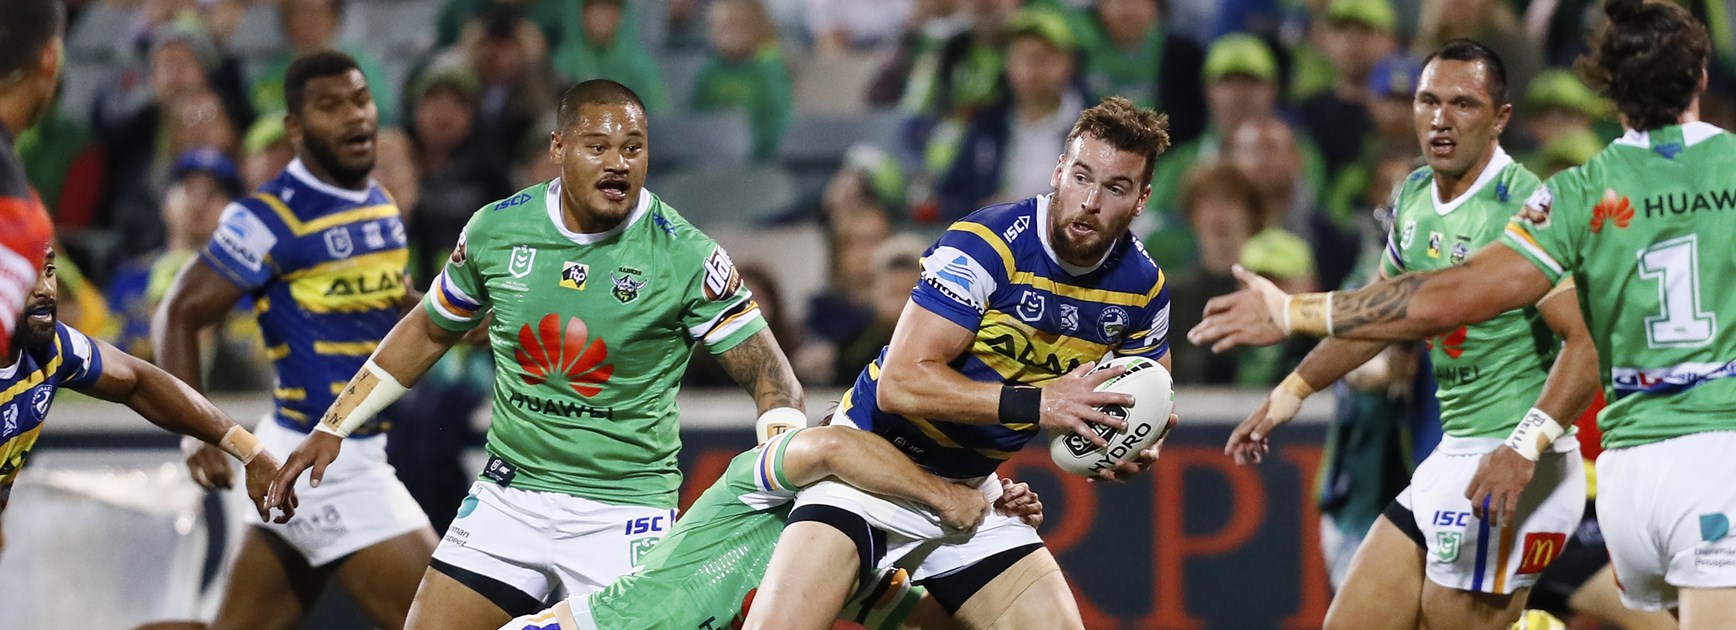 Raiders continue surge up ladder with shutout win over Eels